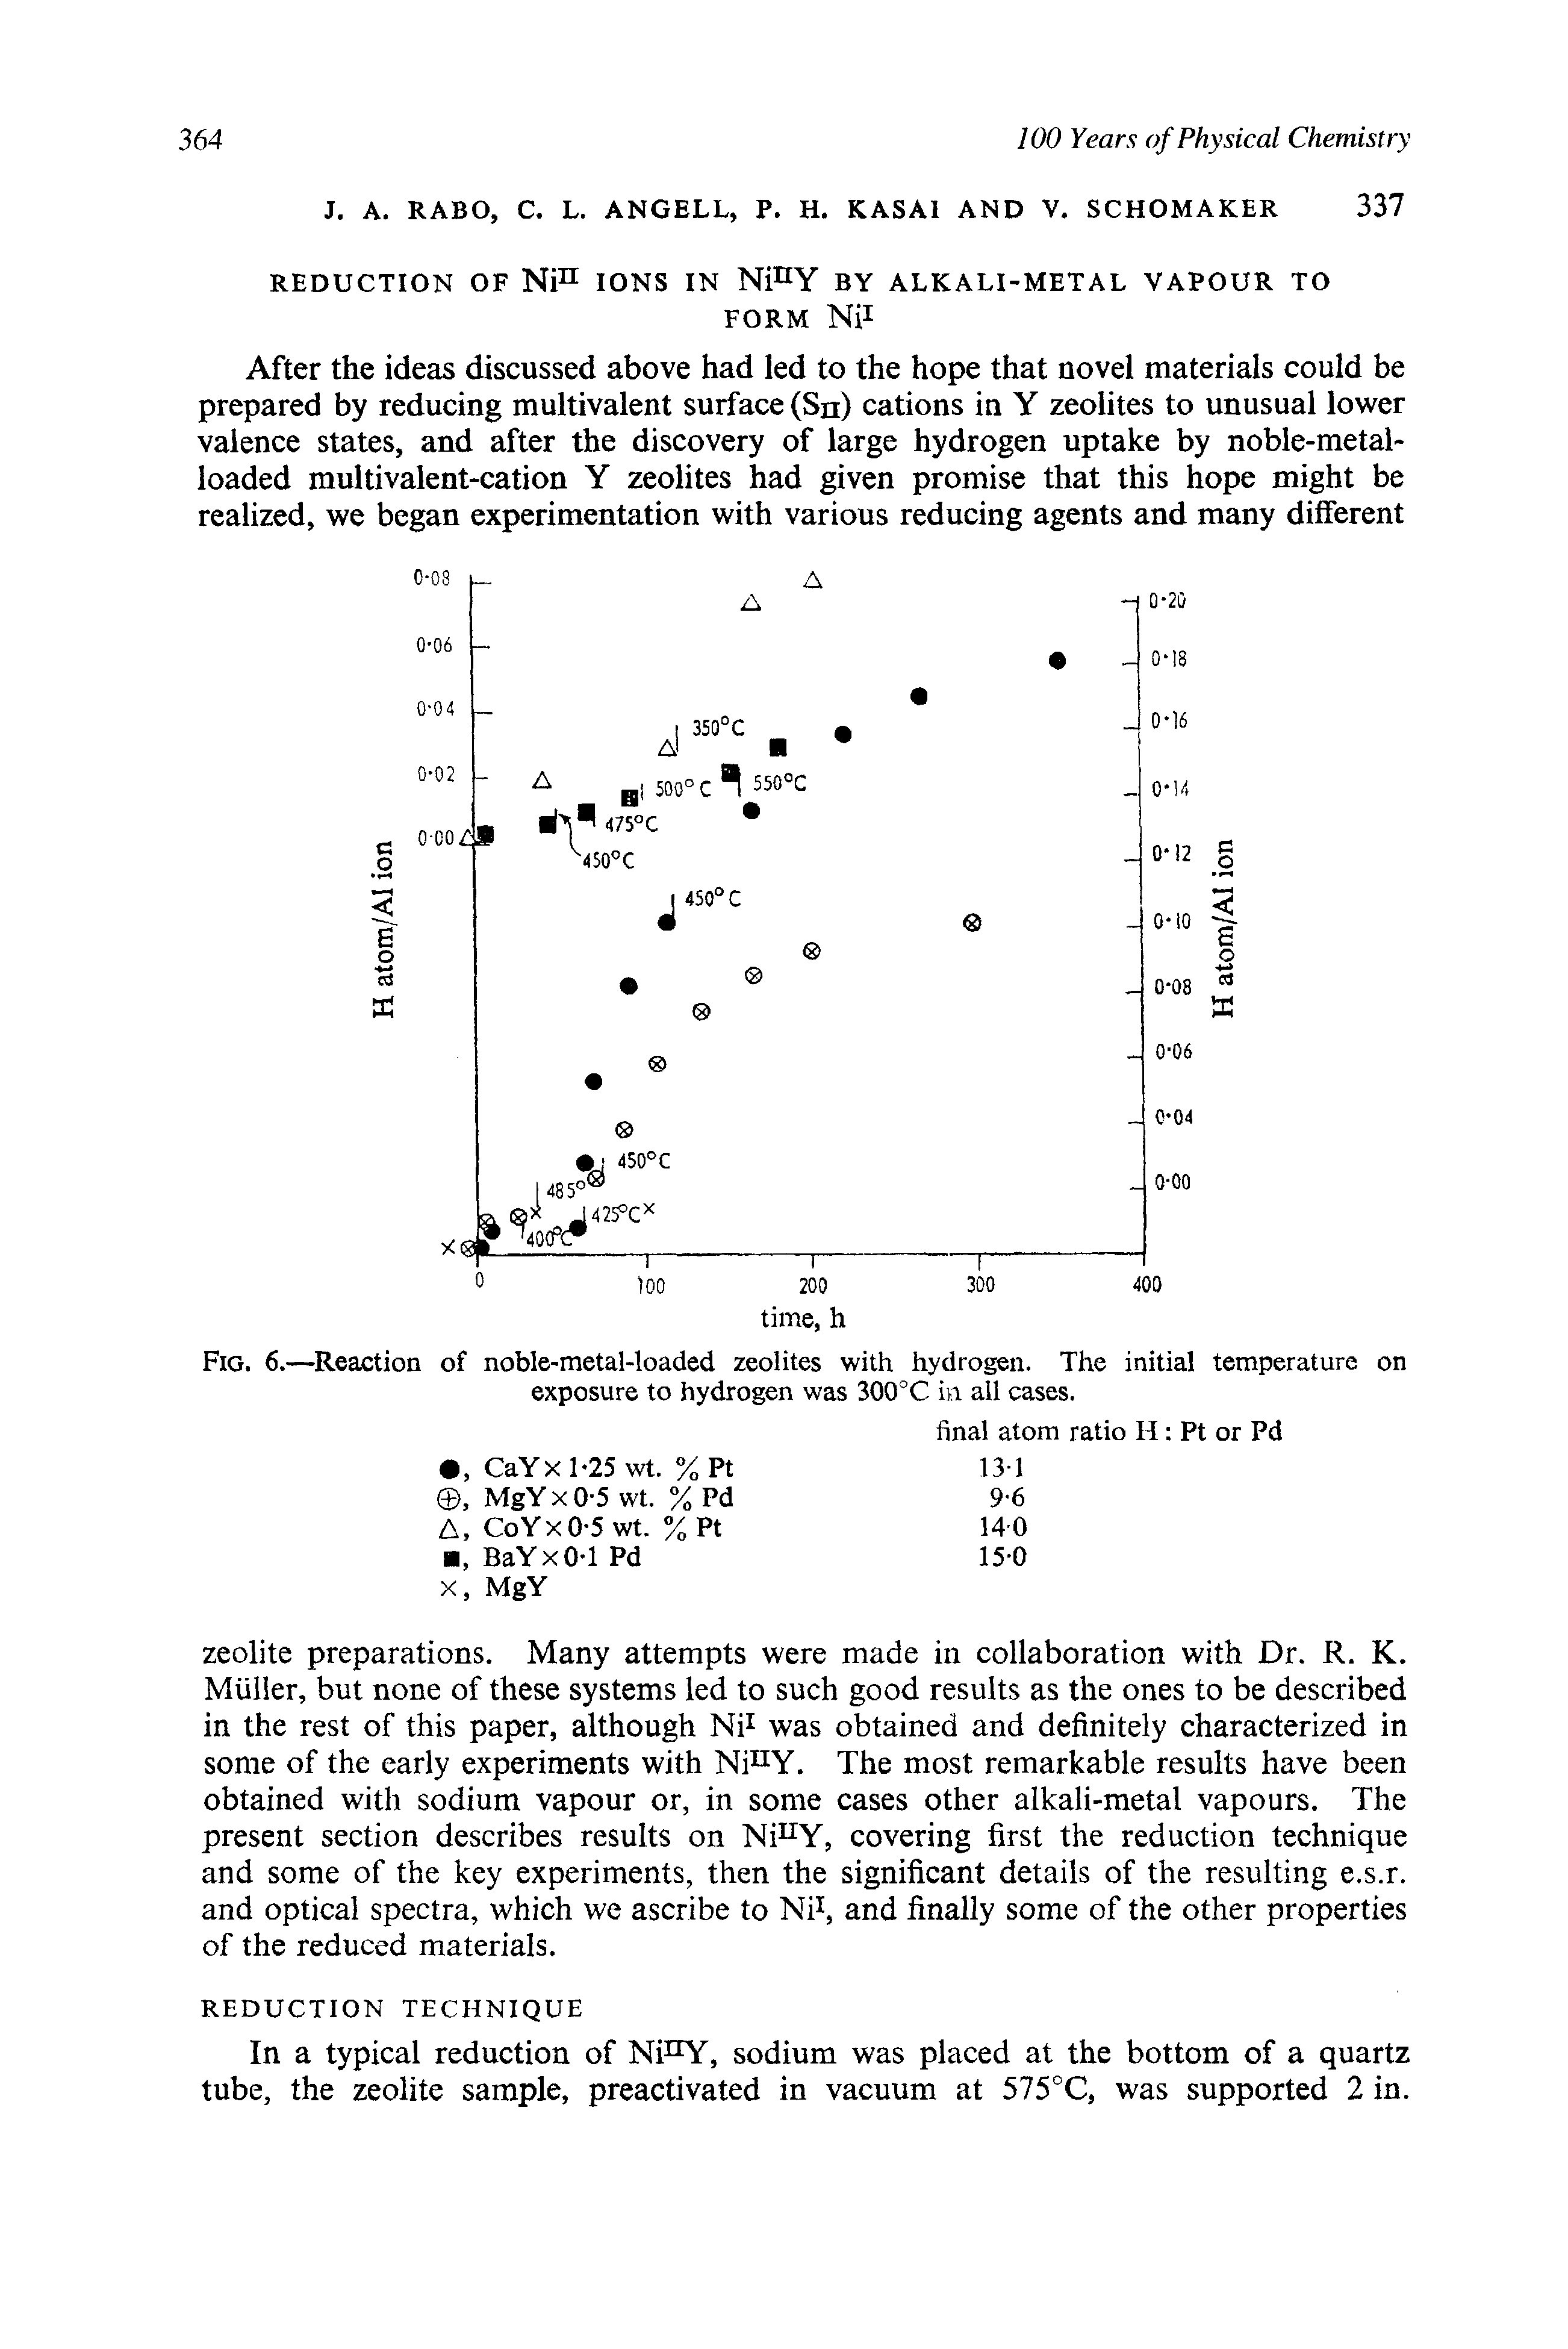 Fig. 6.—Reaction of noble-metal-loaded zeolites with hydrogen. The initial temperature on exposure to hydrogen was 300°C in all cases.